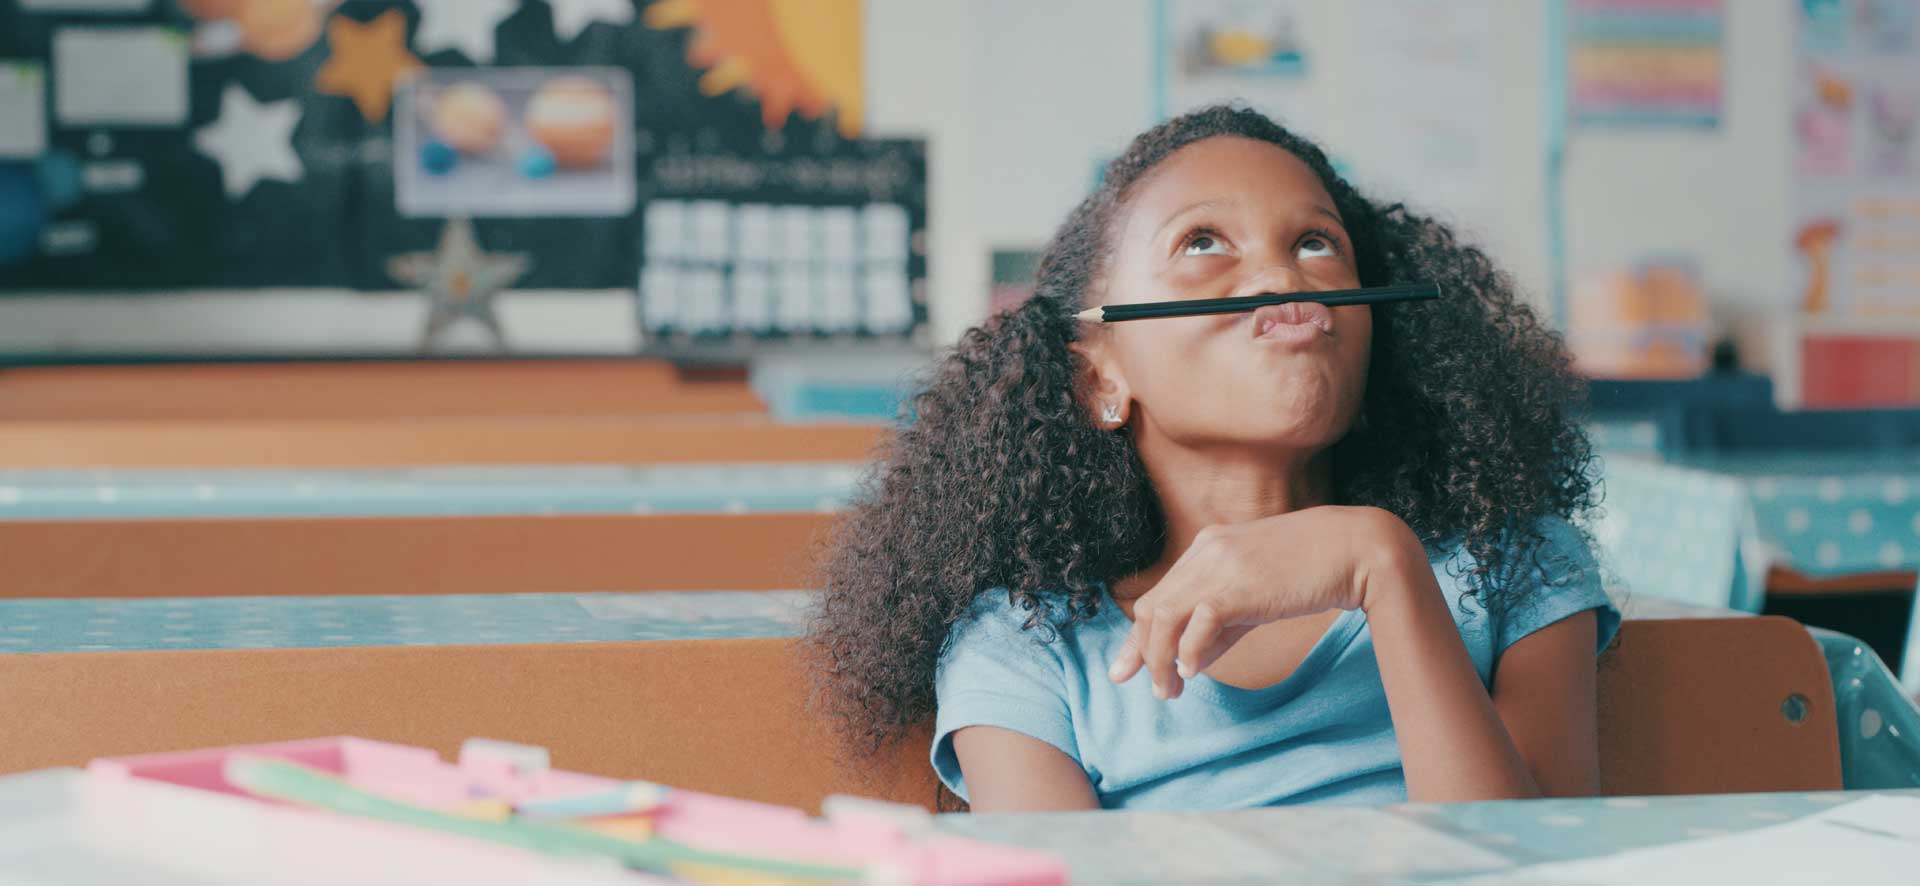 A child is distracted in class, and has resorted to attempting to balance her pencil under her nose.